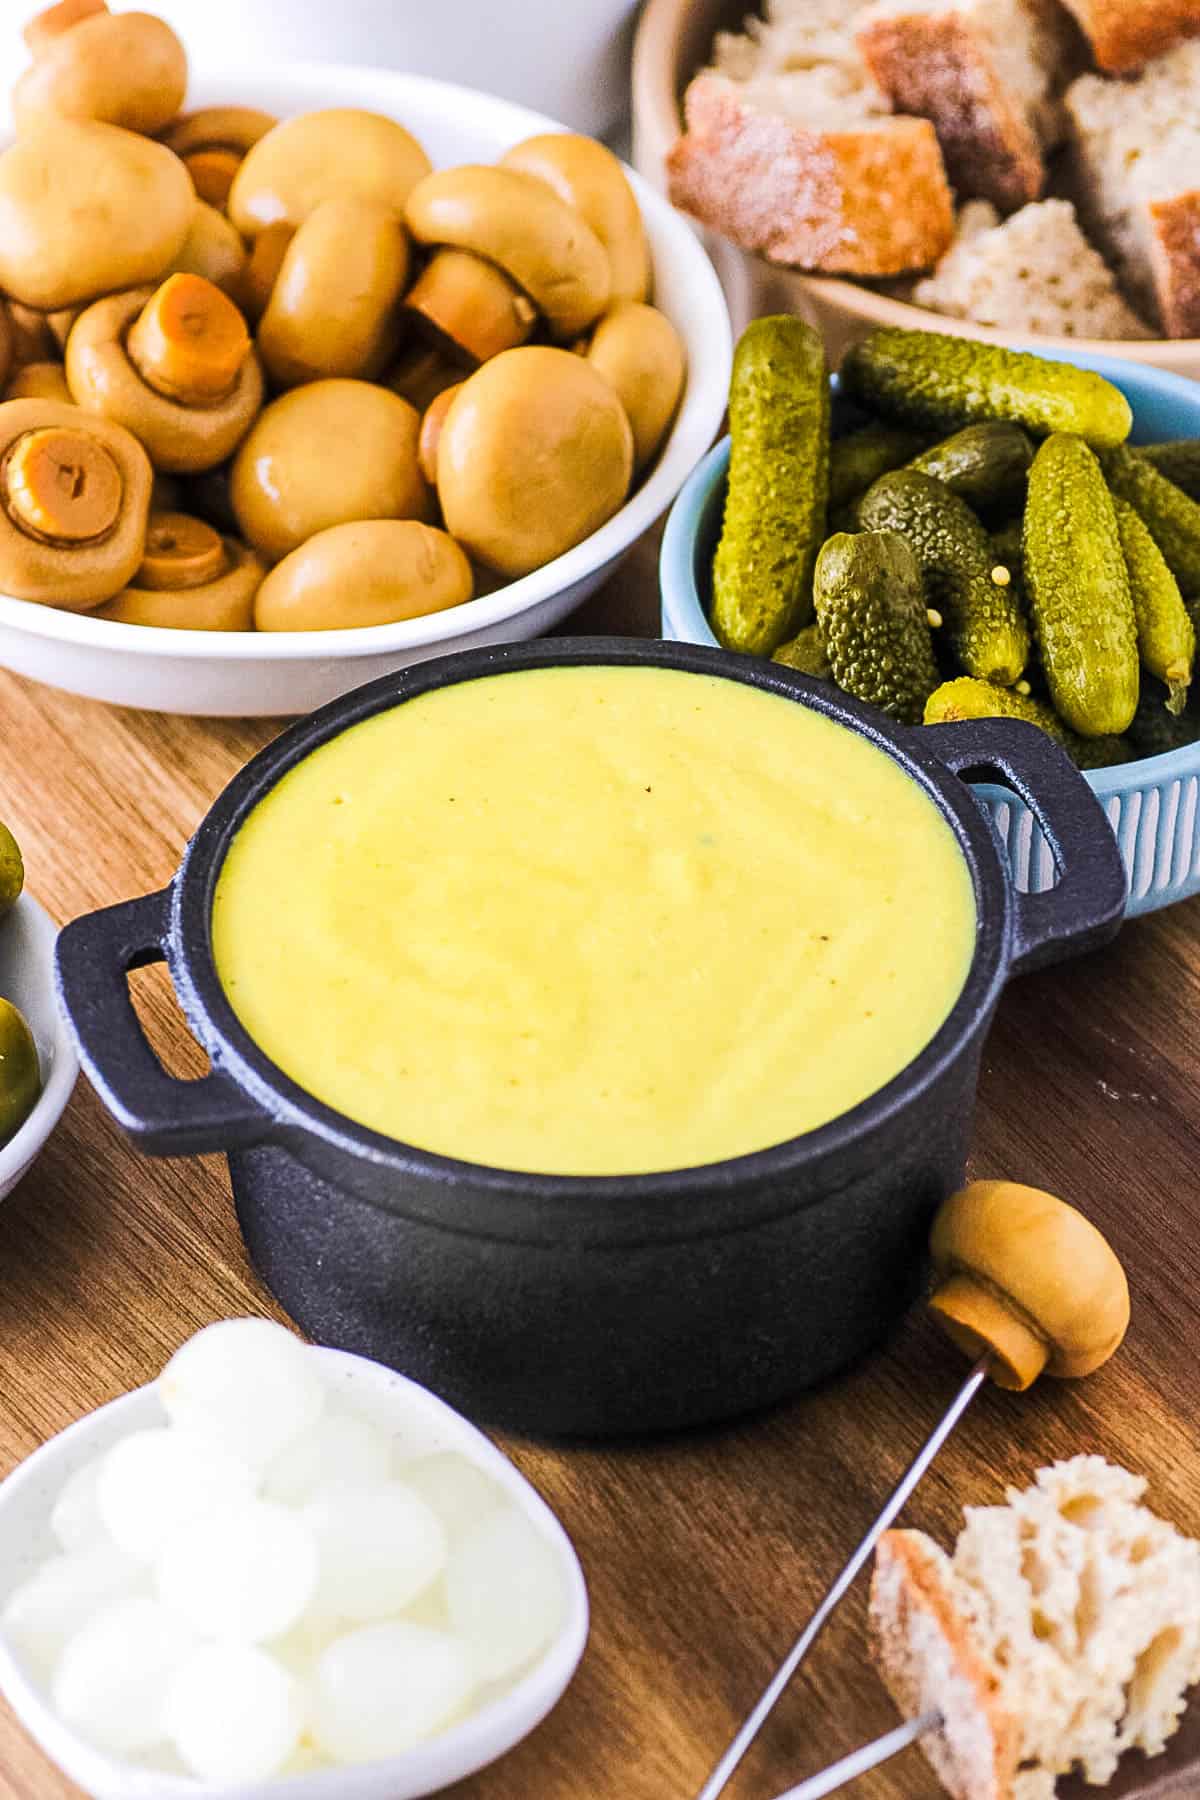 Vegan fondue, served in a fondue pot with veggie dippers on the side.